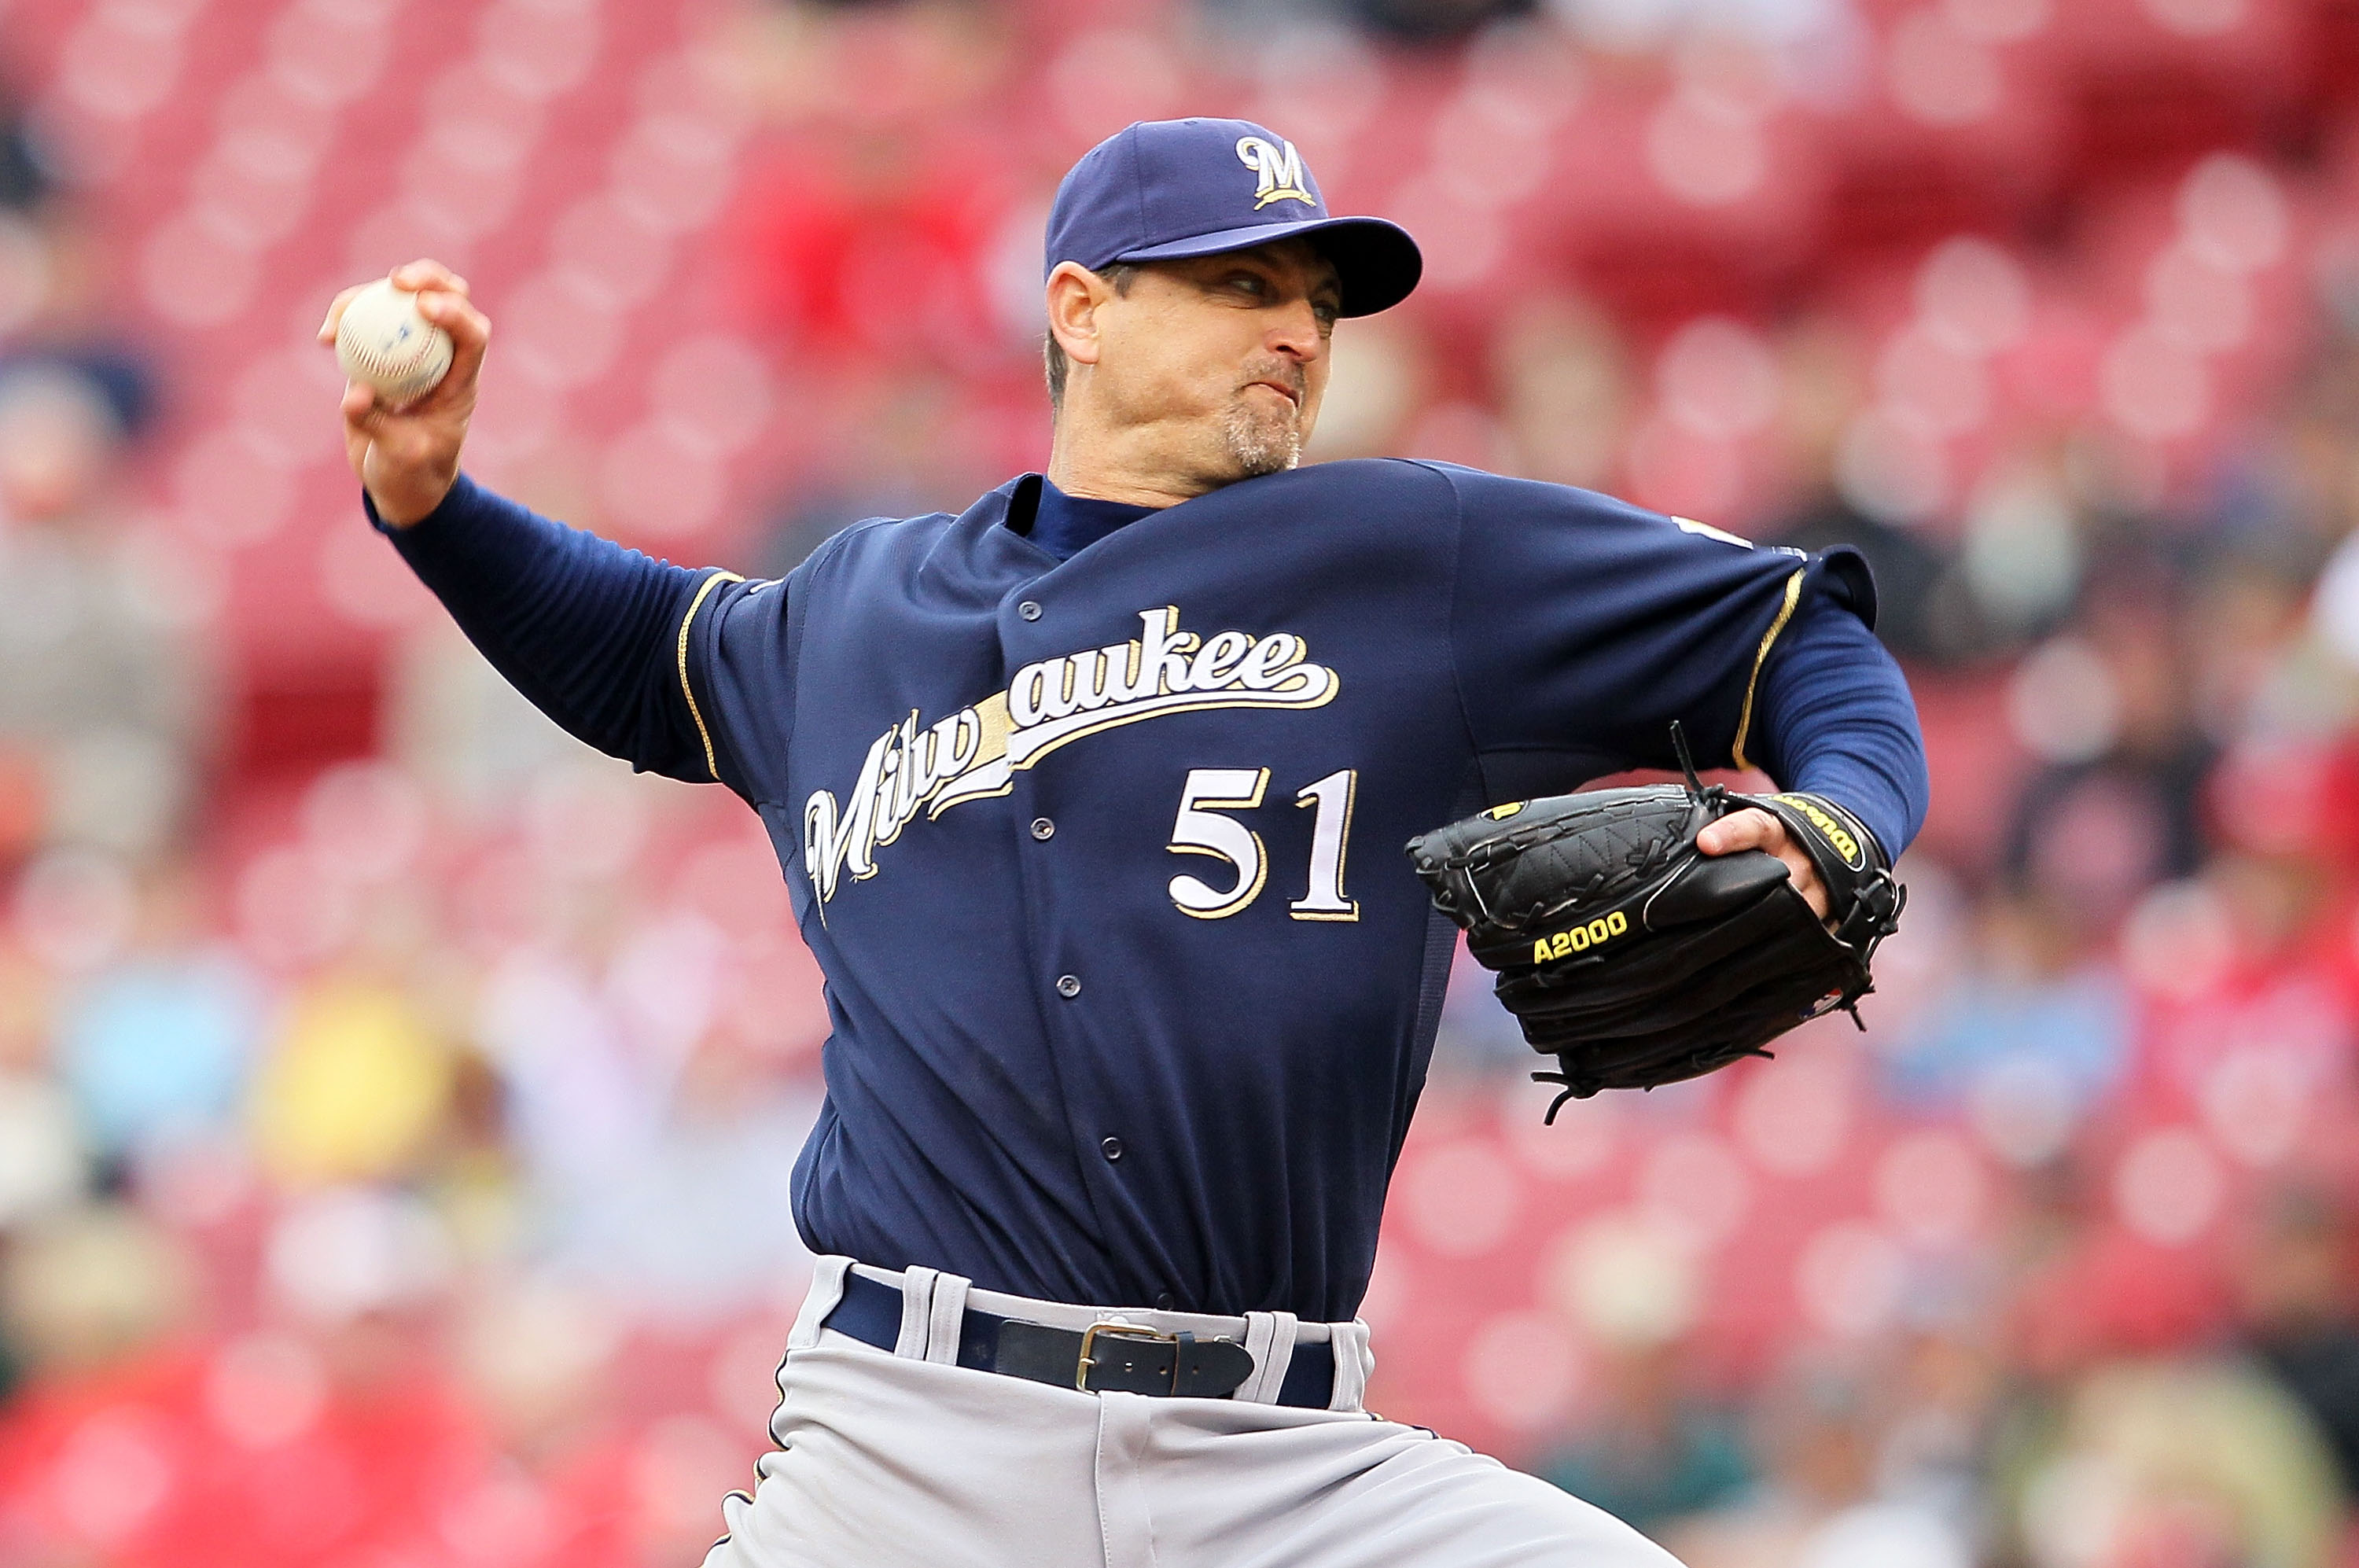 CINCINNATI - MAY 18:  Trevor Hoffman #51 of the Milwaukee Brewers throws a pitch in the 9th inning during the game against the Cincinnati Reds at Great American Ball Park on May 18, 2010 in Cincinnati, Ohio. The Reds won 5-4. (Photo by Andy Lyons/Getty Im